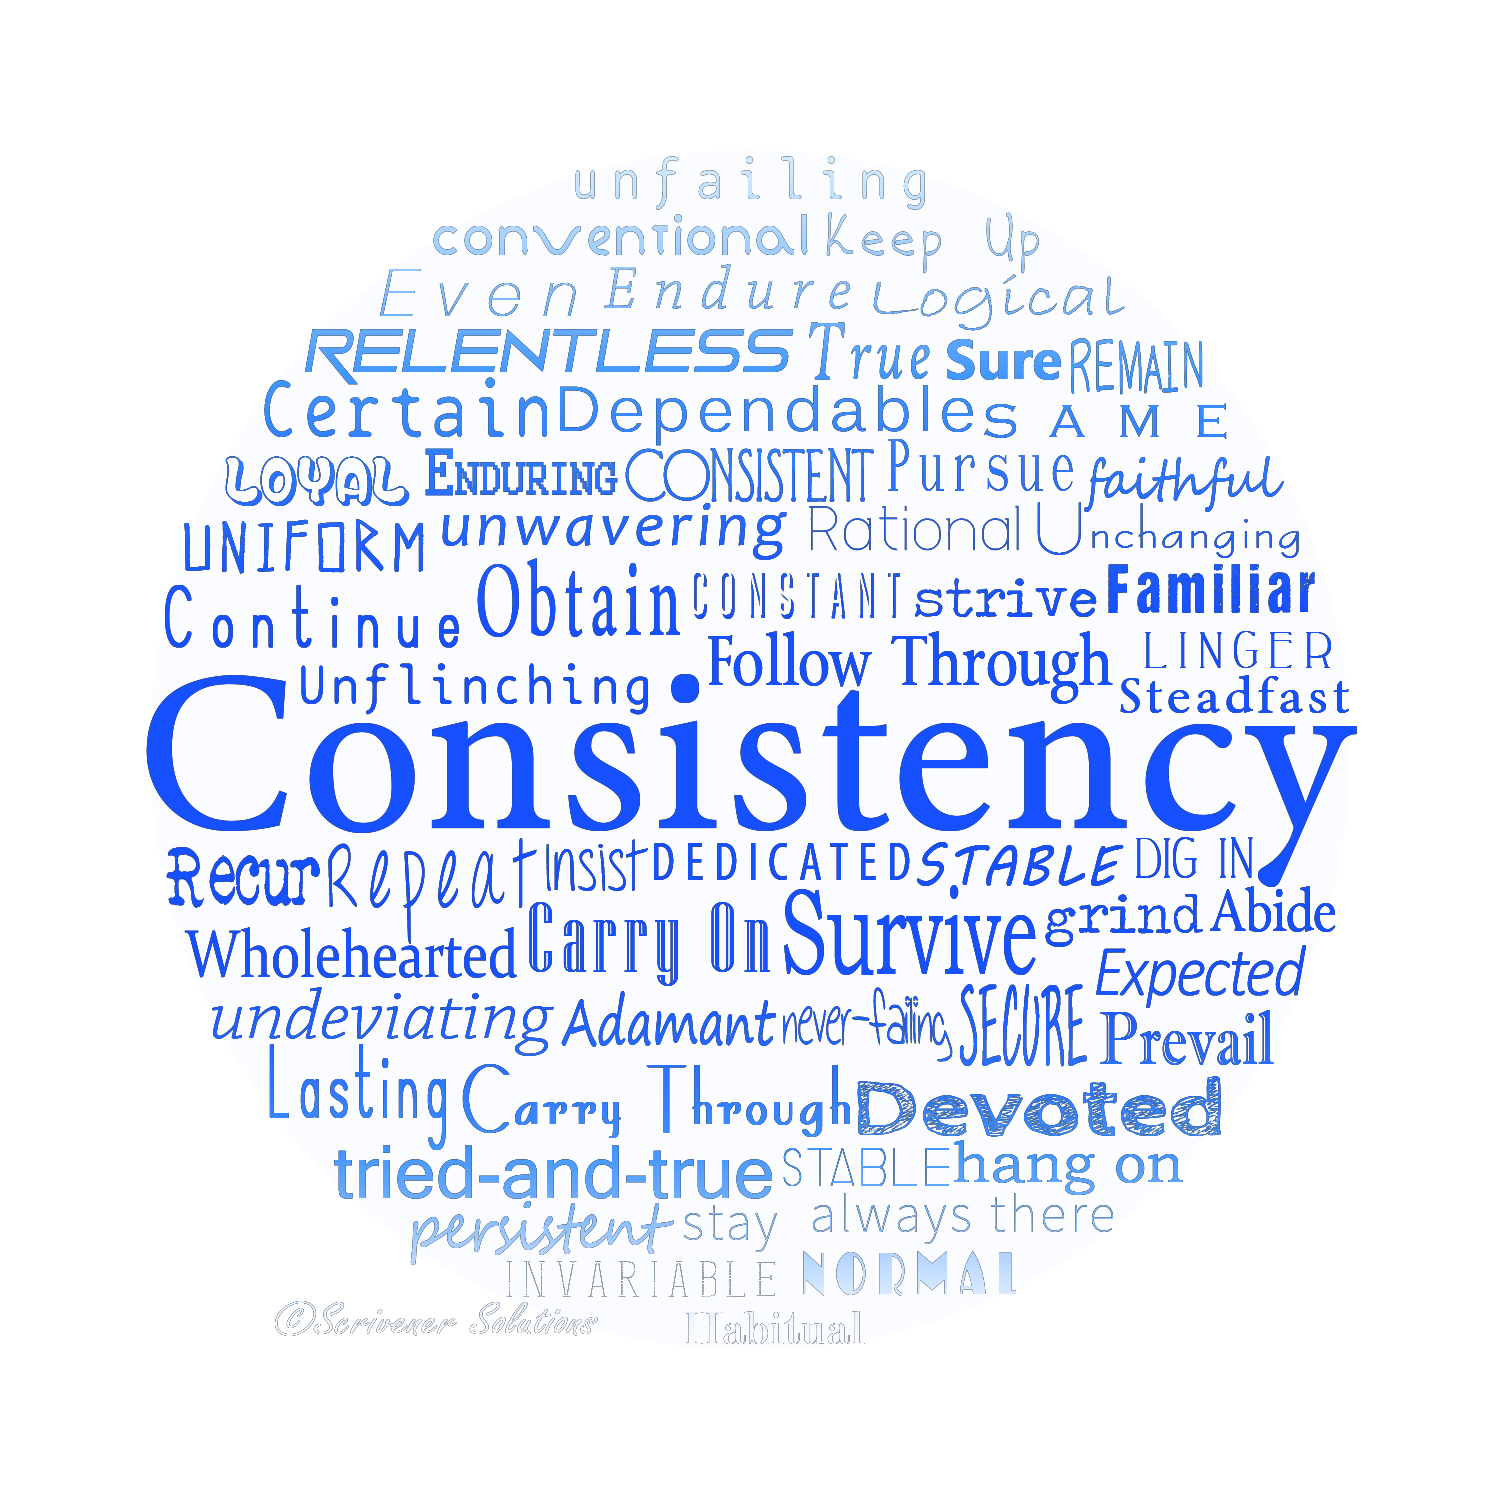 Does Consistency Really Matter?